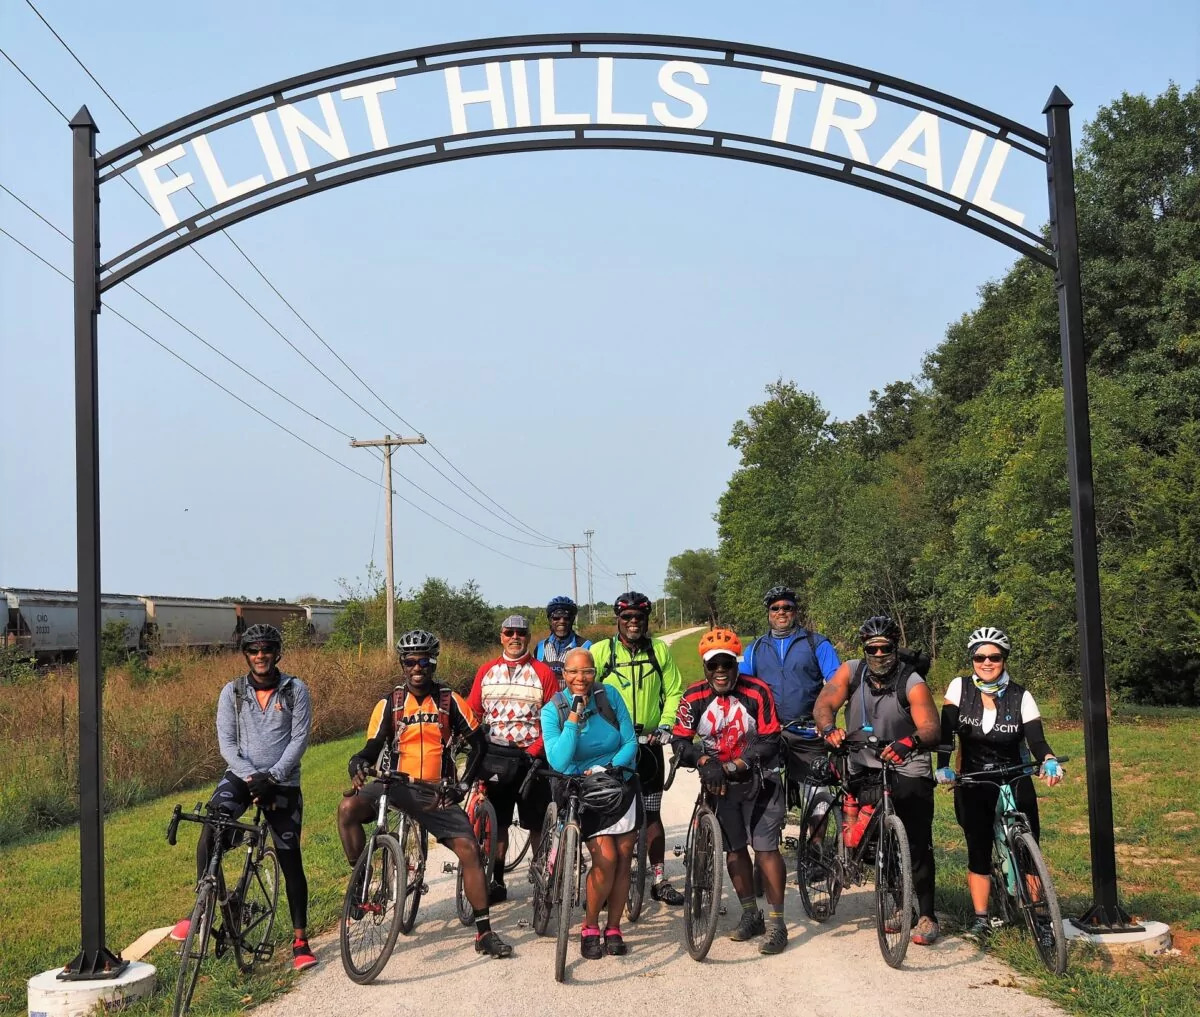 Members of the Major Taylor Cycling Club from Kansas City posing below the Flint Hills Trail sign